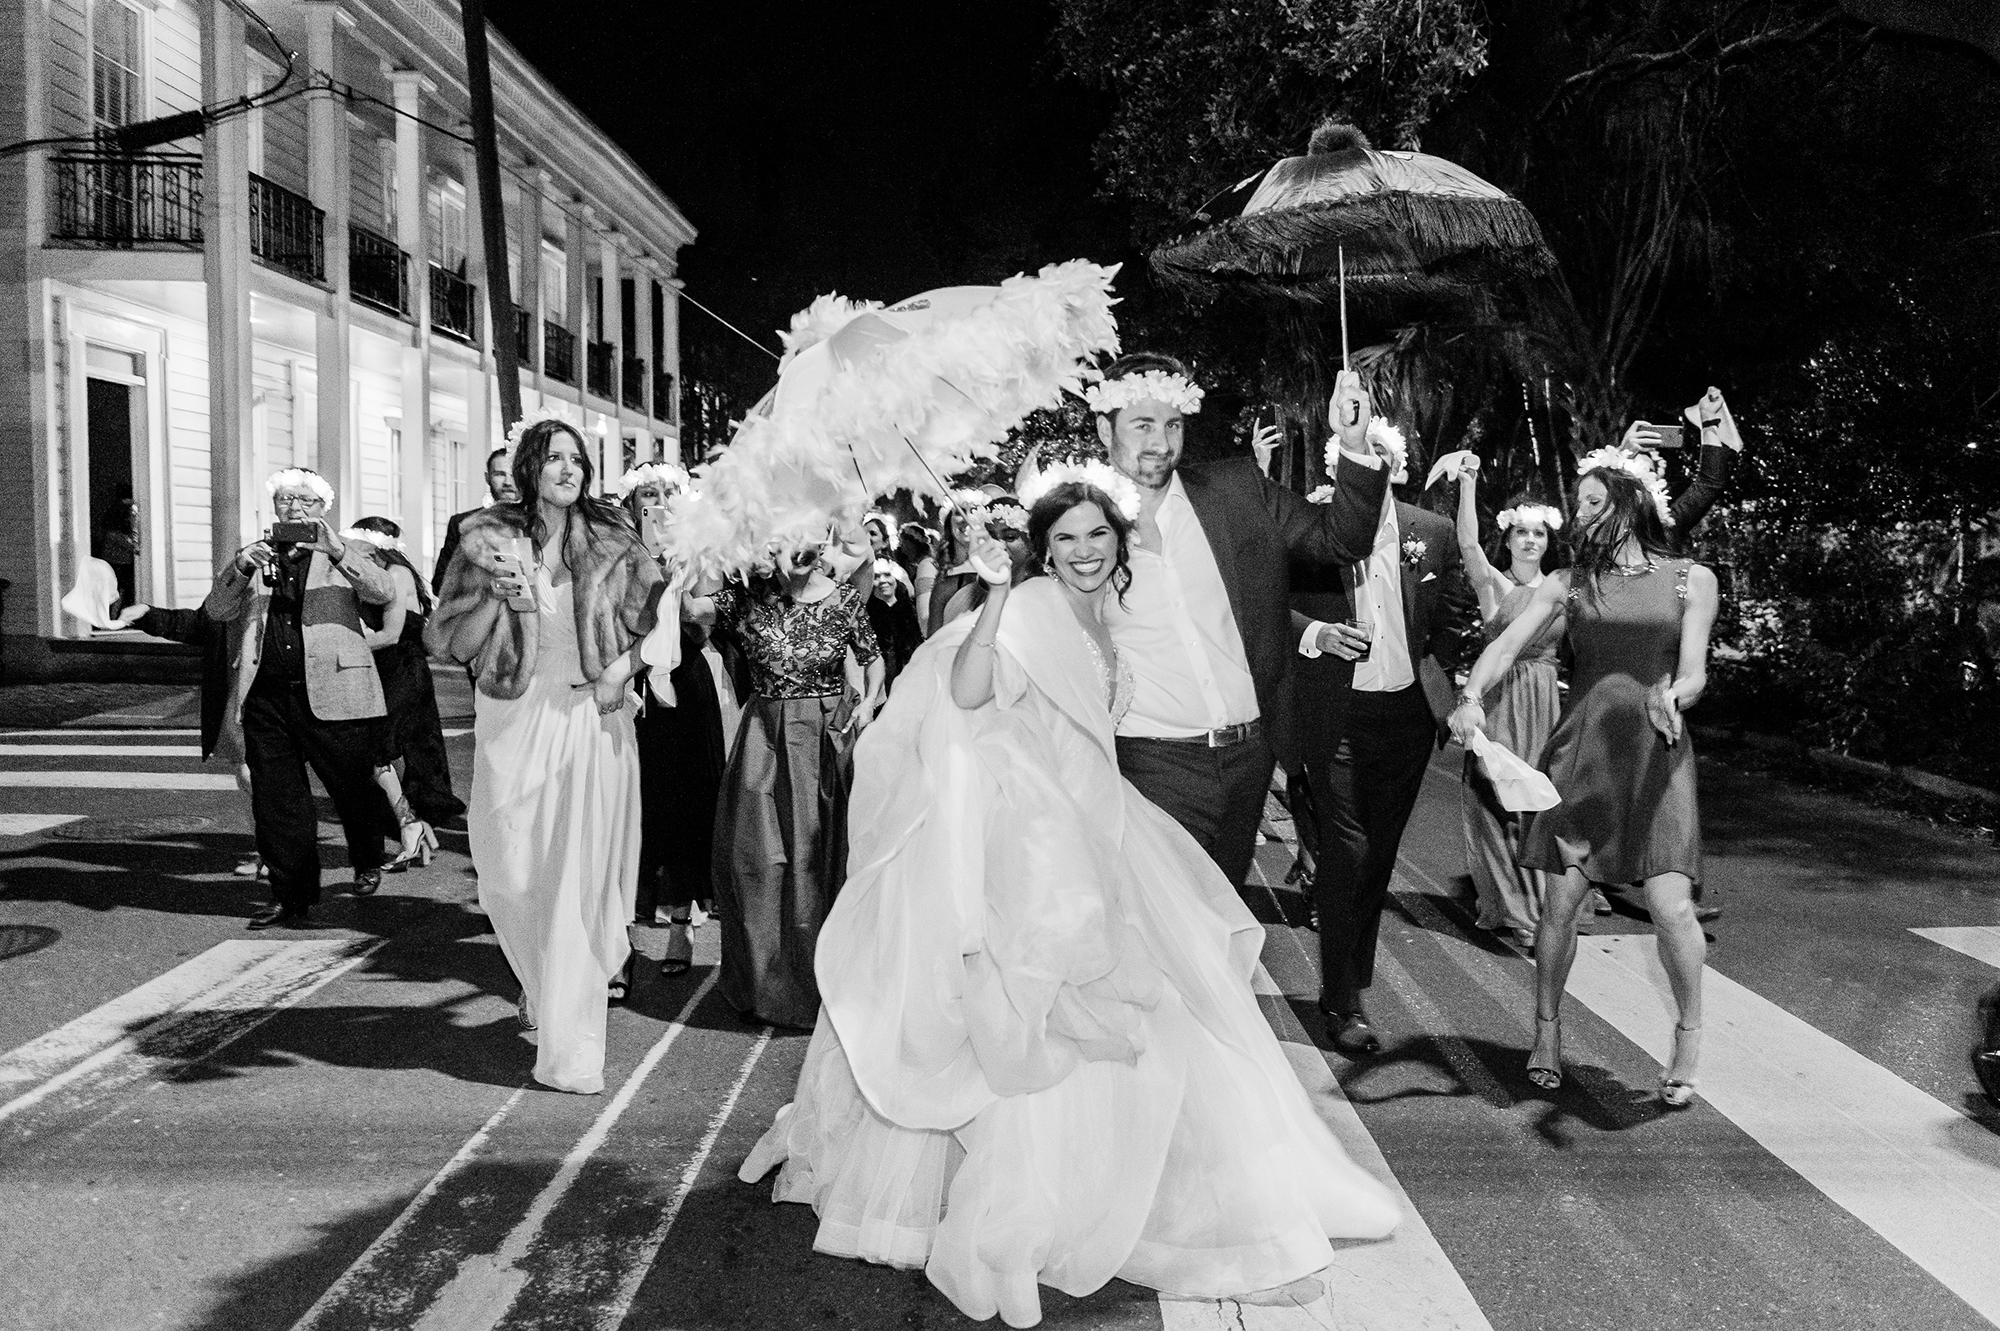 Bride and groom with parasols during second line